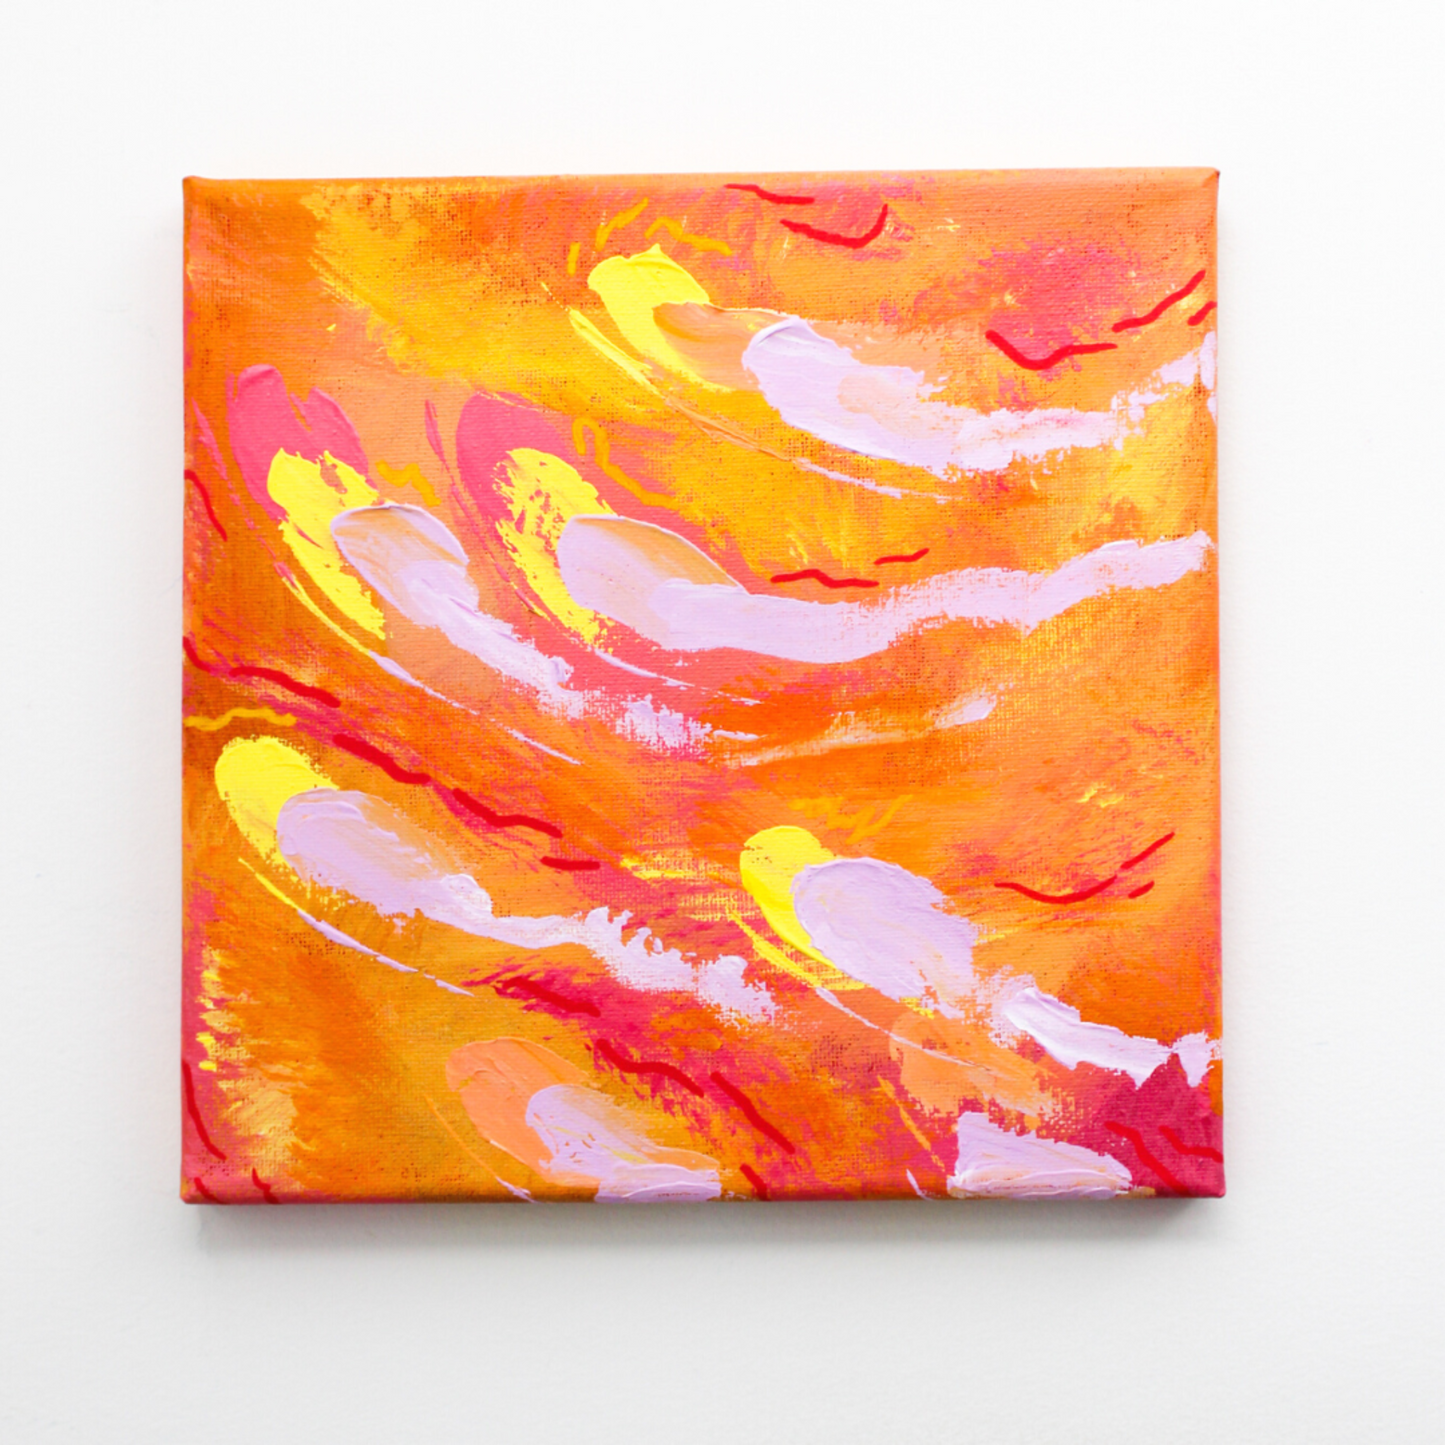 A grey wall and hanging on it is an orange abstract painting with red, yellow, and pale purple streaks throughout.